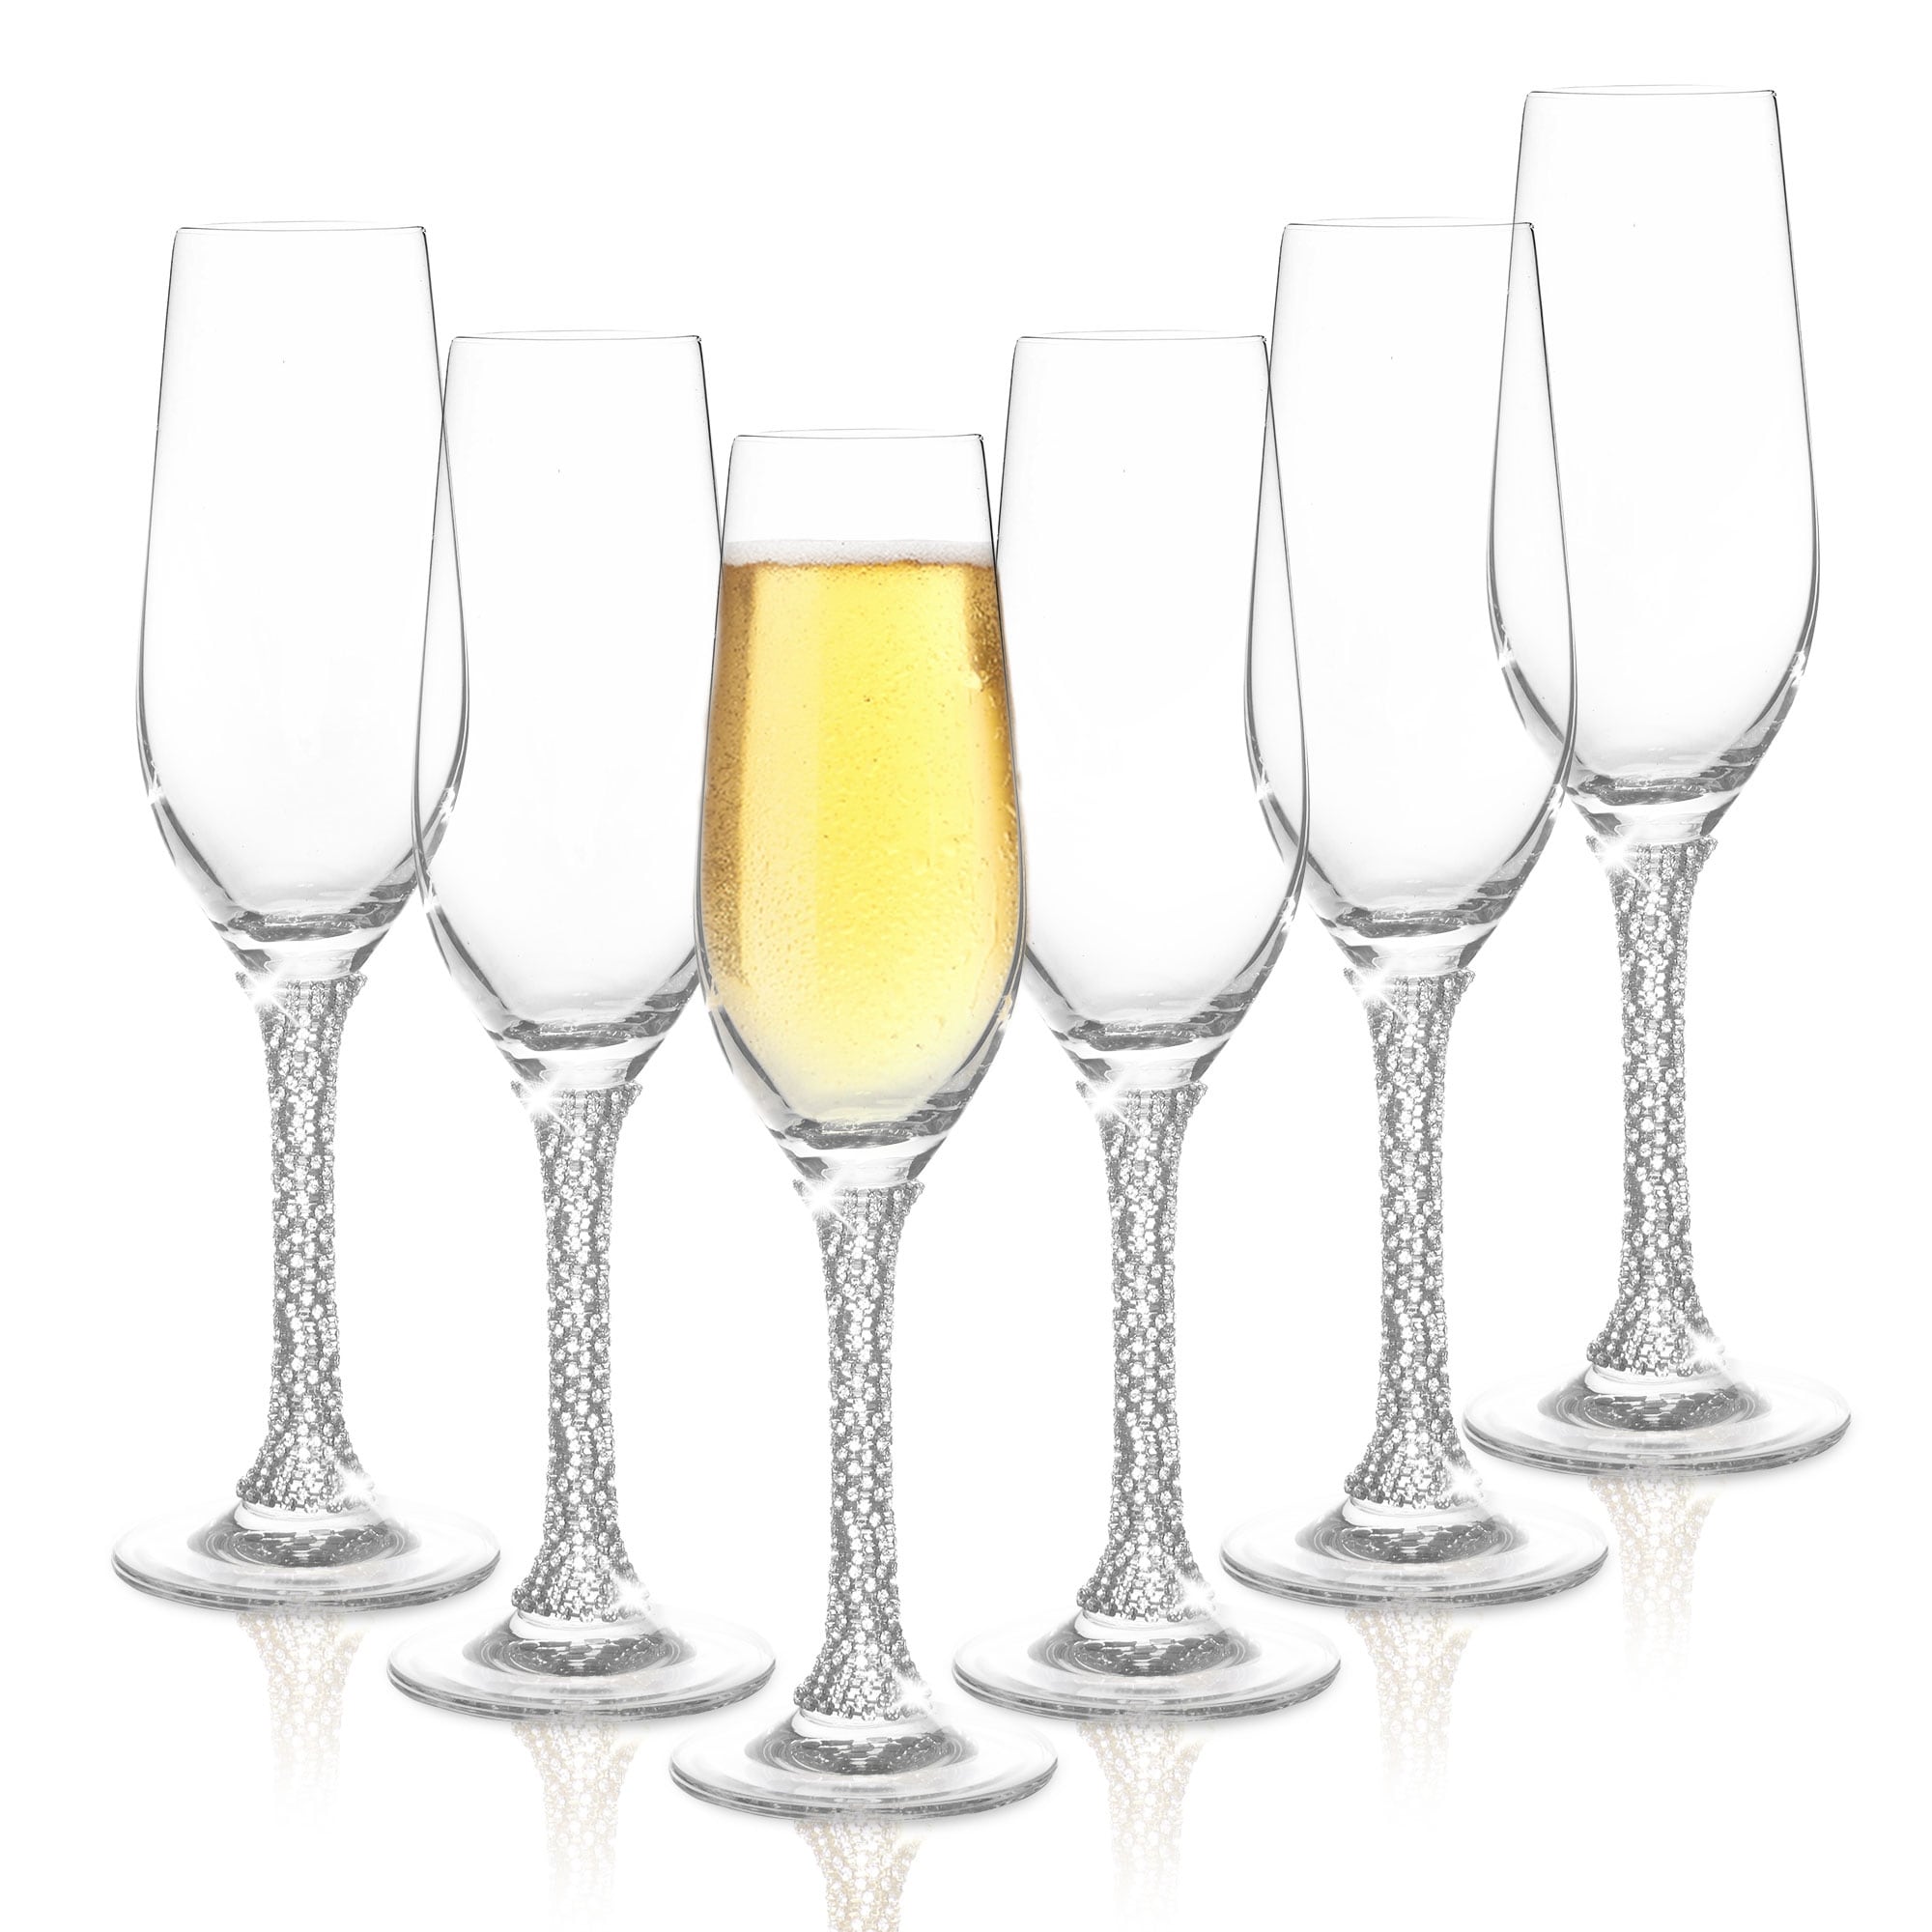 https://ak1.ostkcdn.com/images/products/is/images/direct/918b63f94dc7196bc9ef6fdd1e3876a0e16da42f/Berkware-Crystal-Champagne-Glasses-with-Gold-or-Silver-Stem.jpg